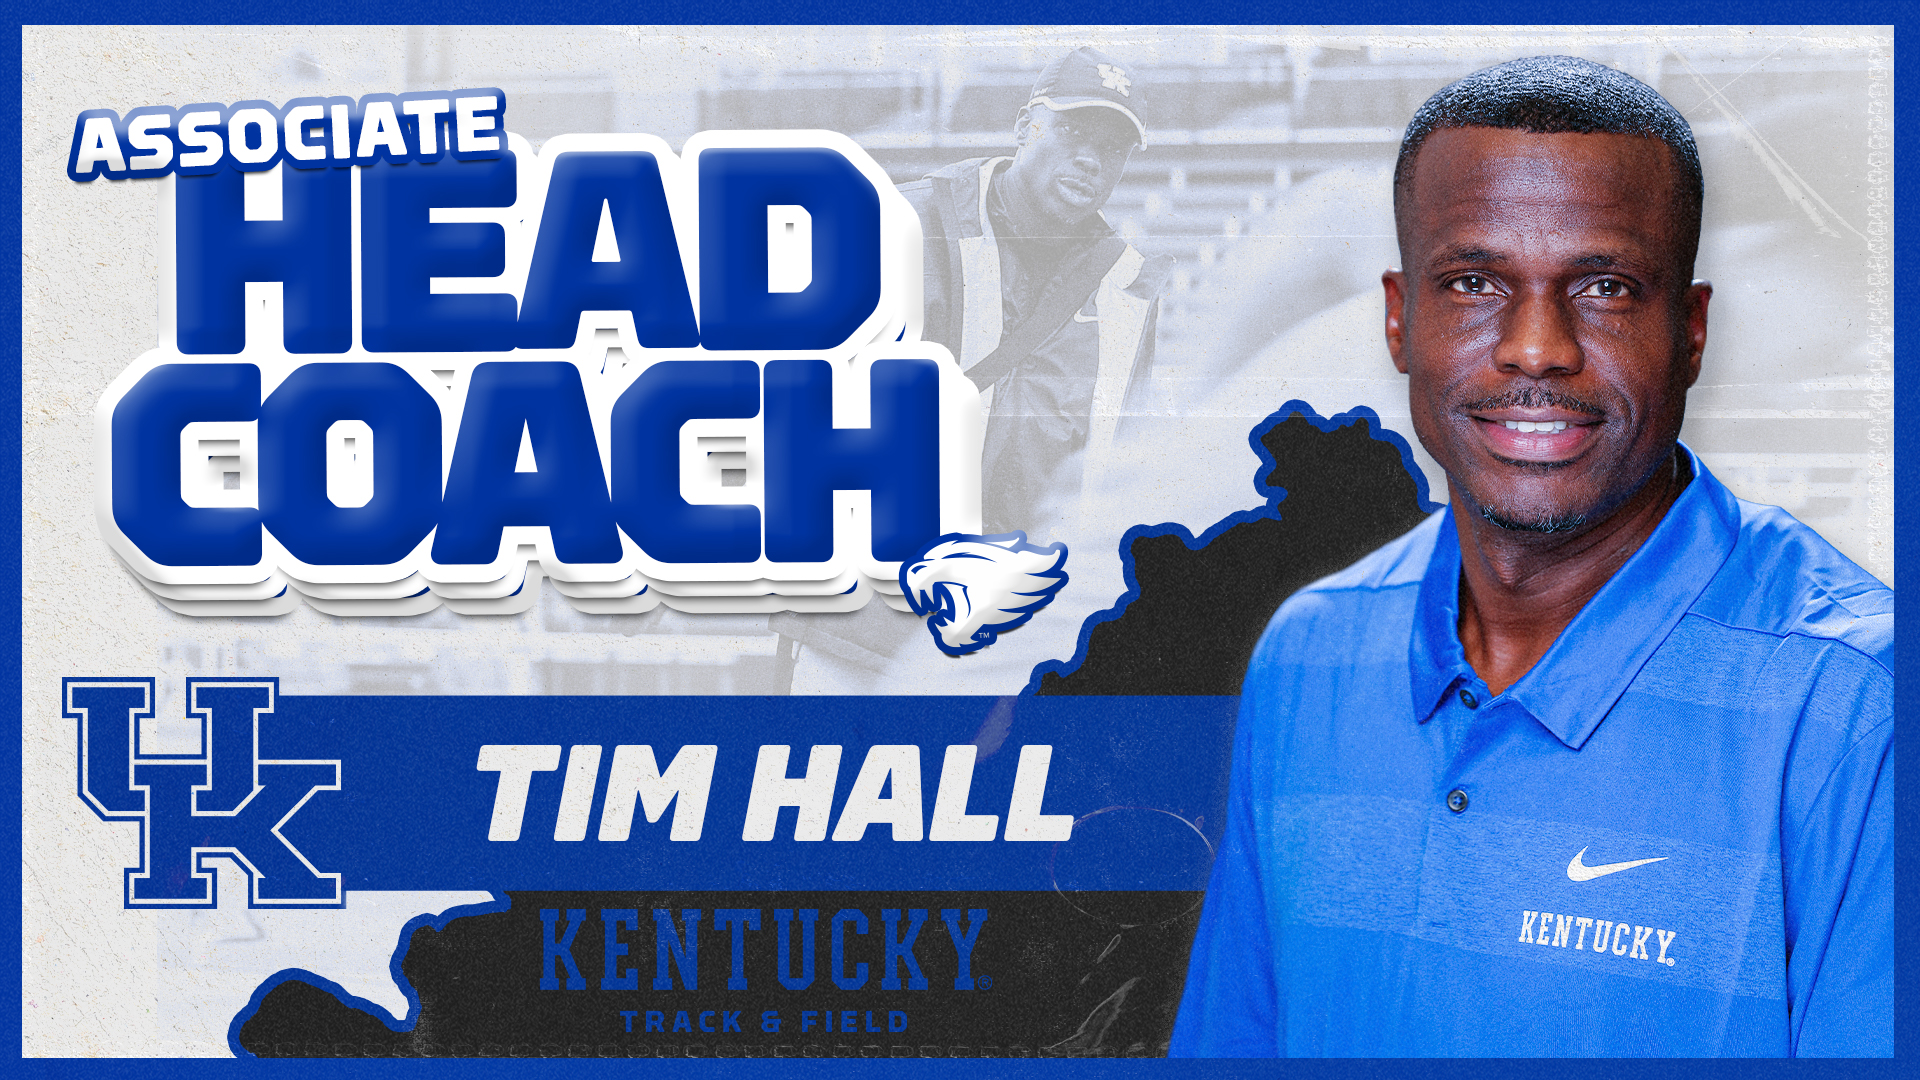 Tim Hall Promoted to Associate Head Coach of Kentucky Track and Field